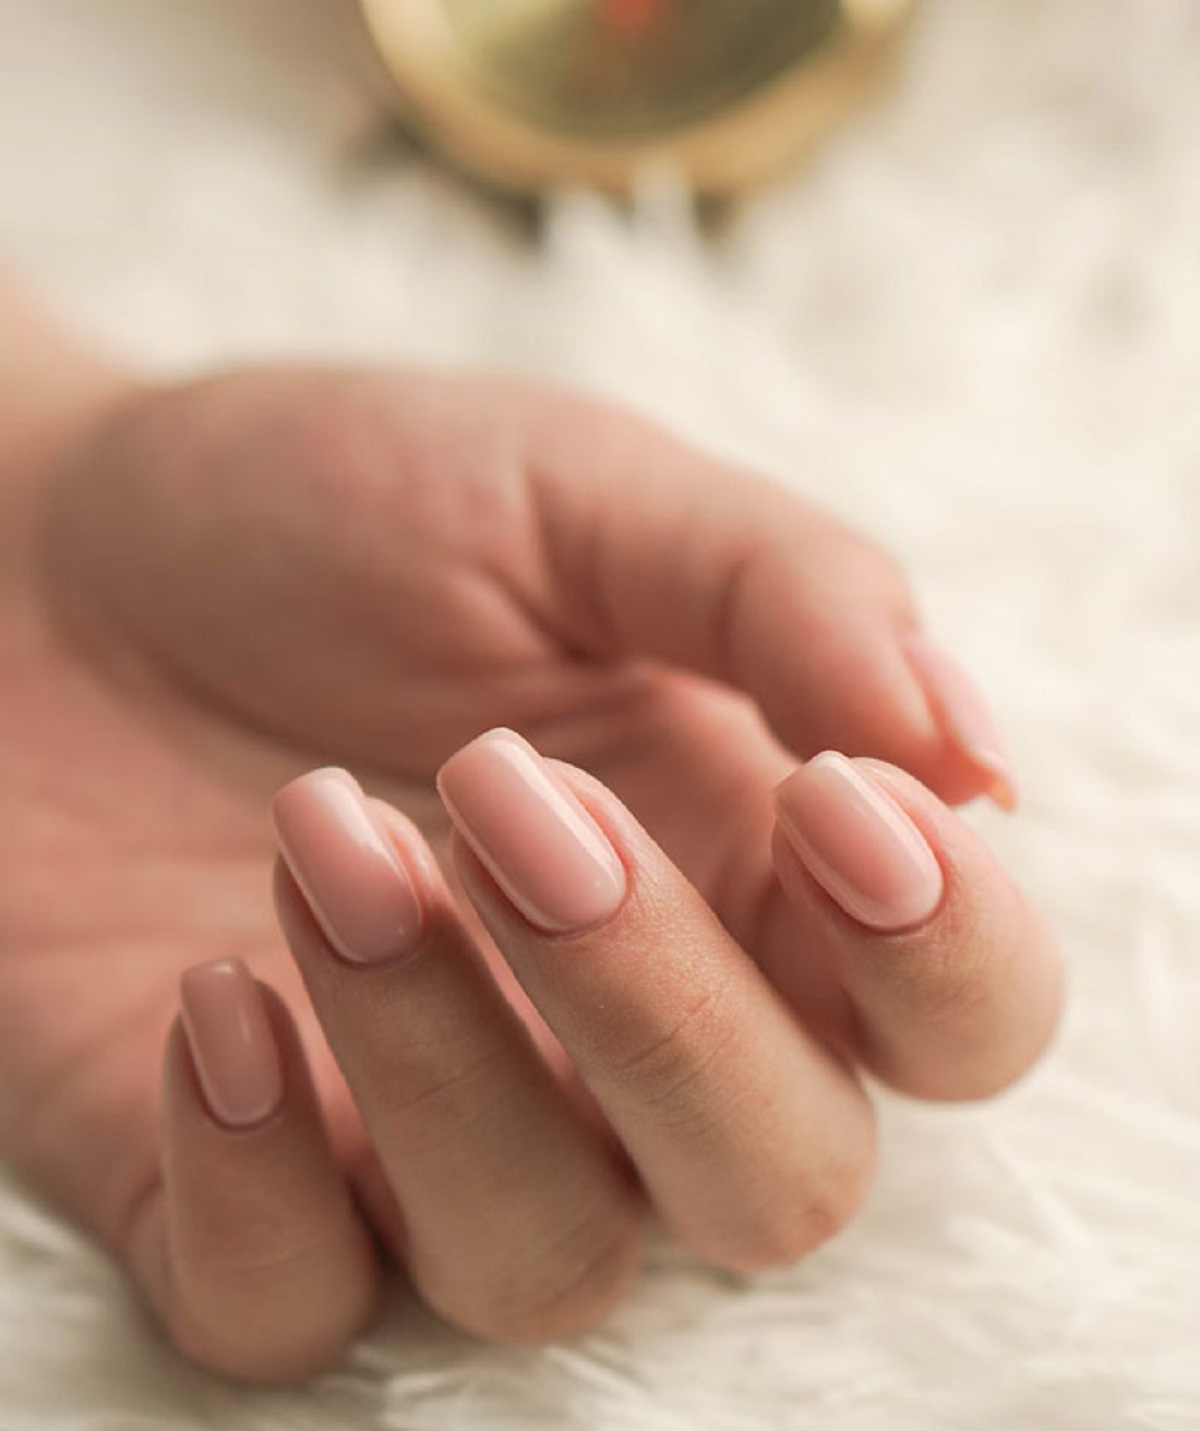 There is an urban myth that your fingernails continue to grow after death, which is supposed to explain why dead bodies often appear to have long nails.

The truth is that the soft tissues in the fingers and hands tend to contract as they lose moisture, leading to the *appearance* of growing nails.